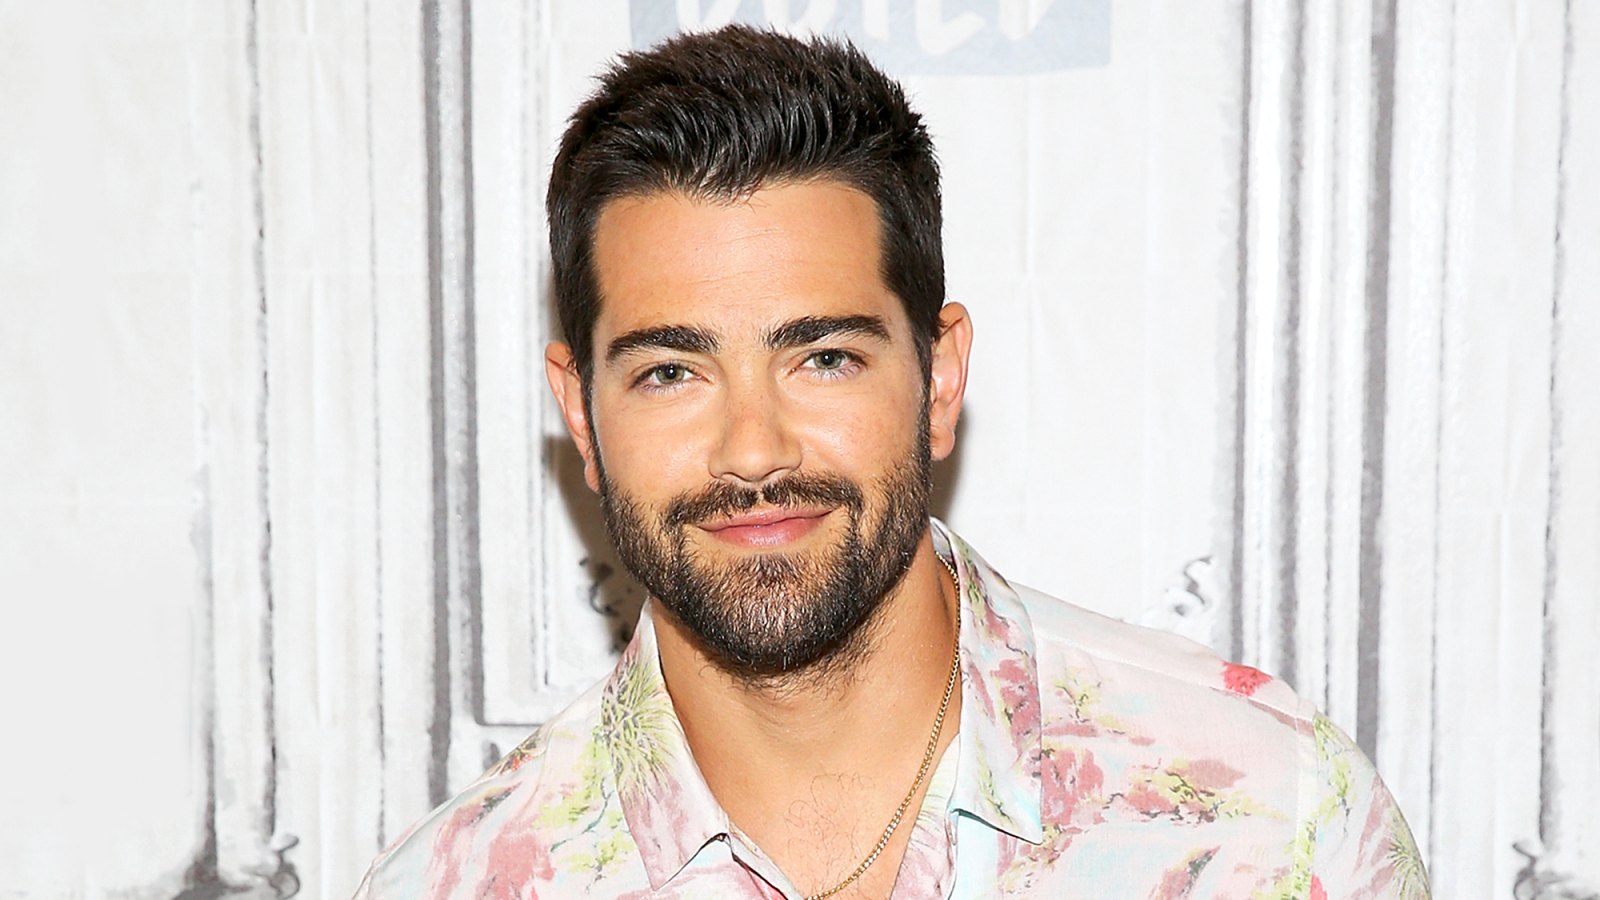 Jesse Metcalfe visits to discuss "Chesapeake Shores" at Build Studio in New York City.